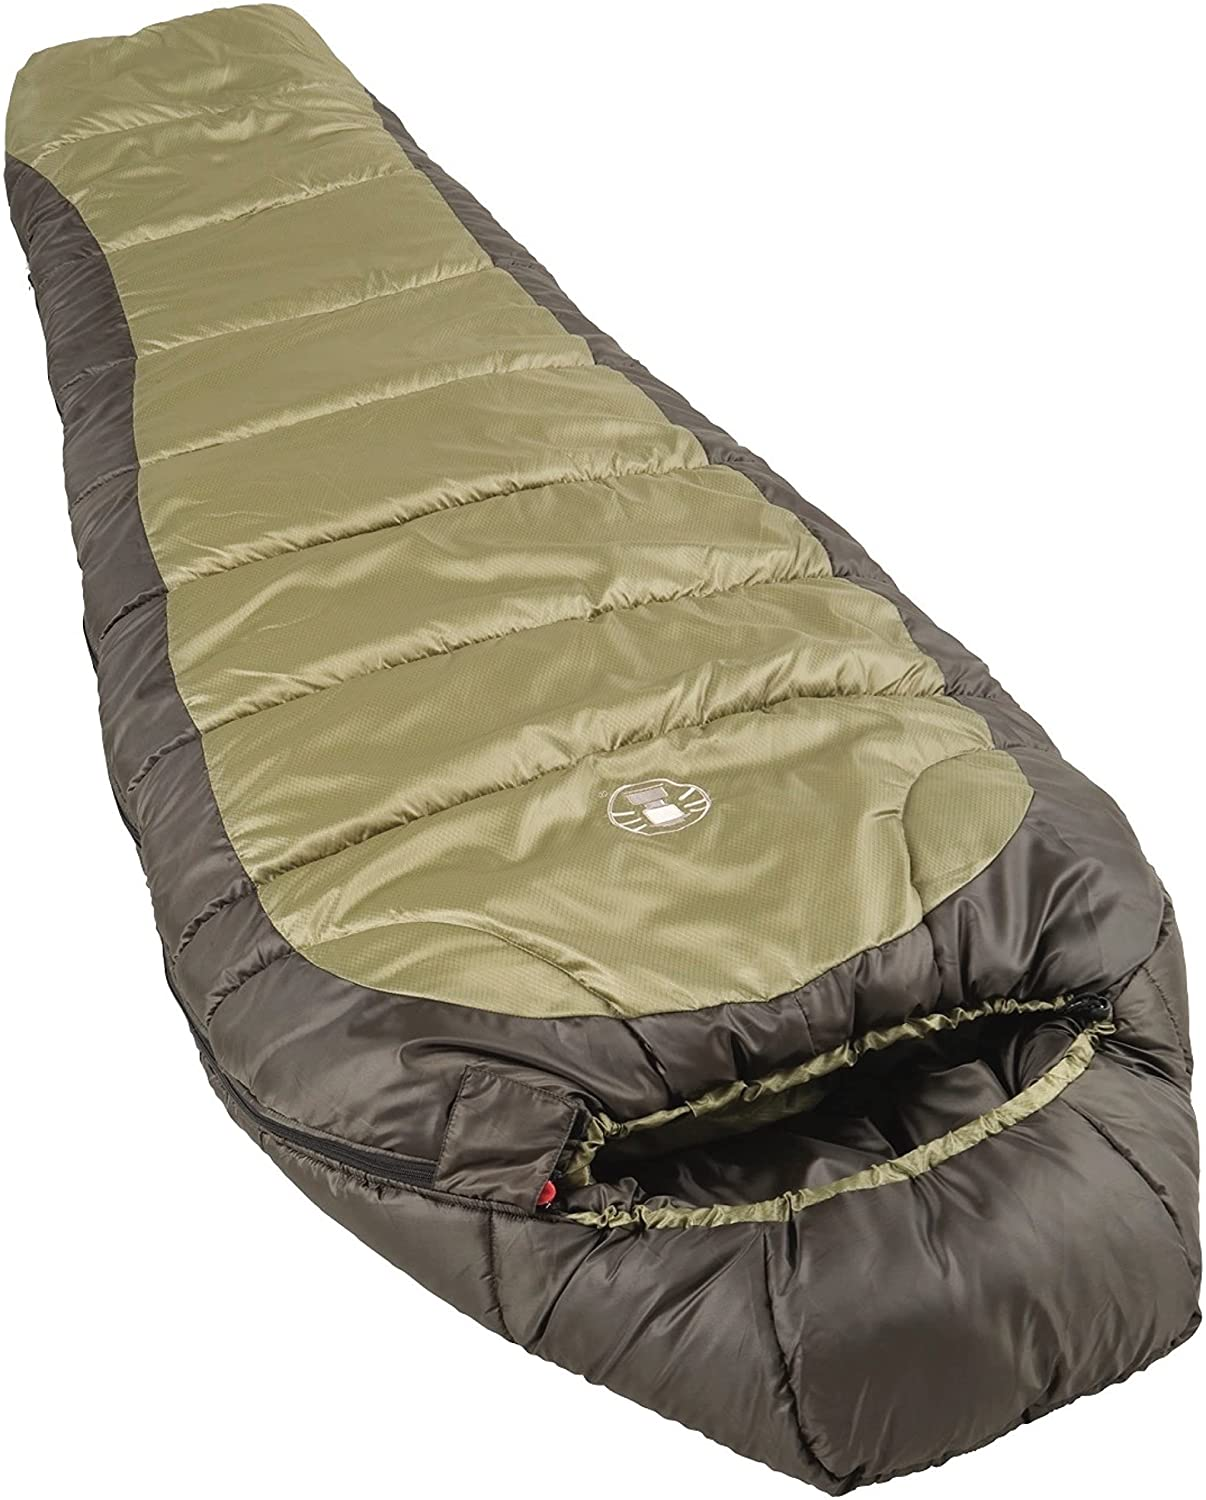 Coleman Juniper Lake Instant Dome Tent w/ Annex and Carry Bag, 4 Person  Capacity, 1 Piece - Kroger